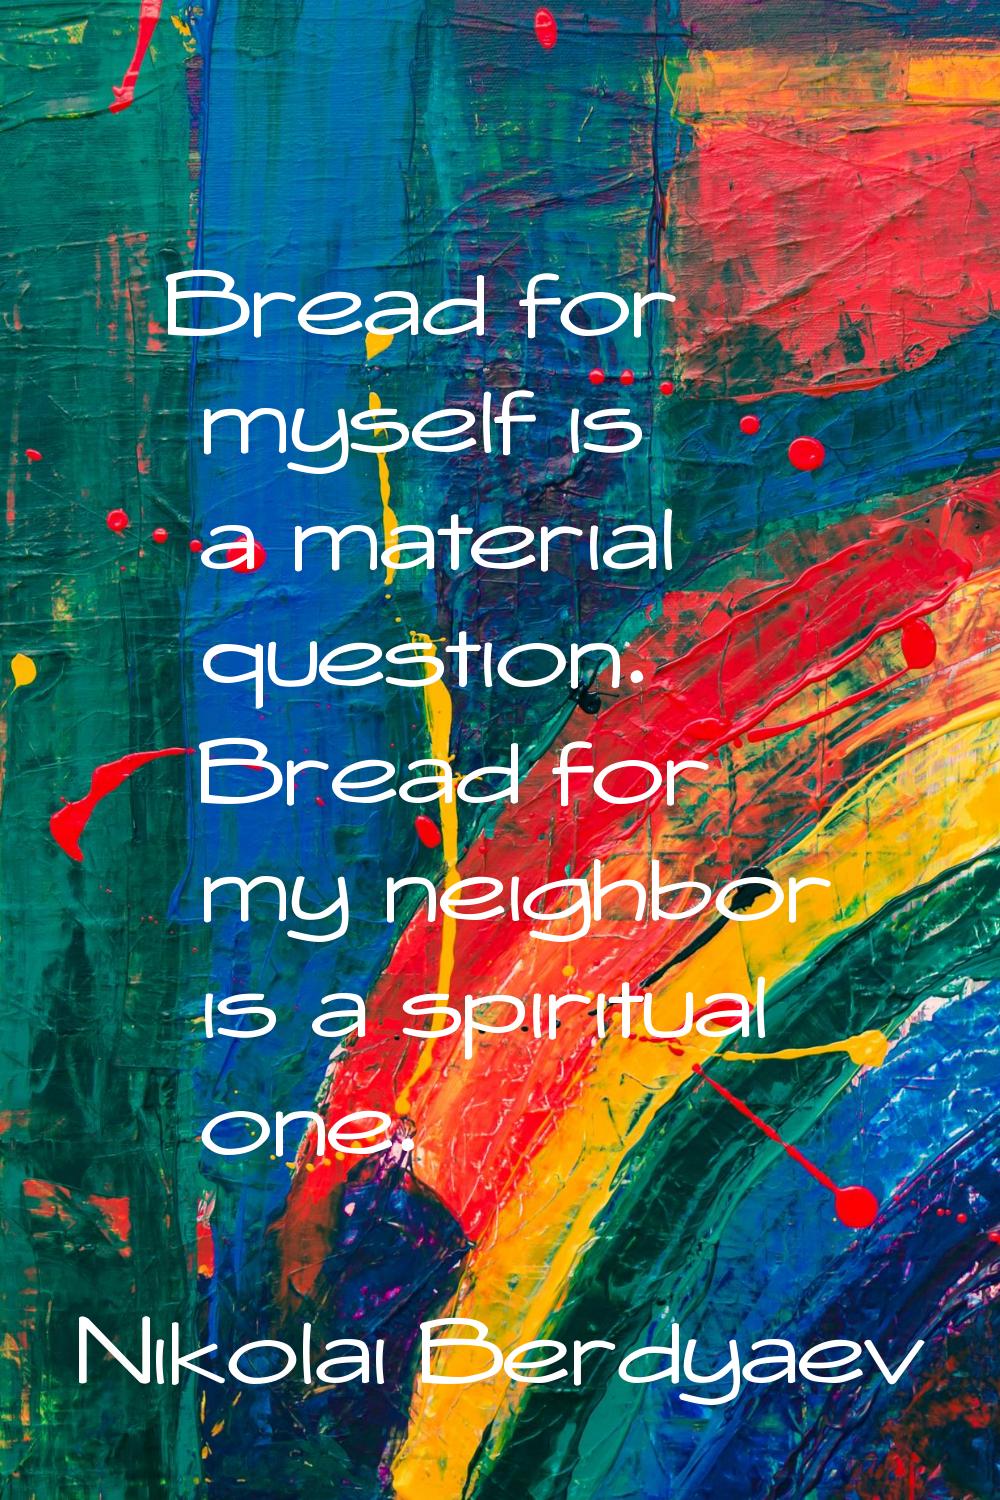 Bread for myself is a material question. Bread for my neighbor is a spiritual one.